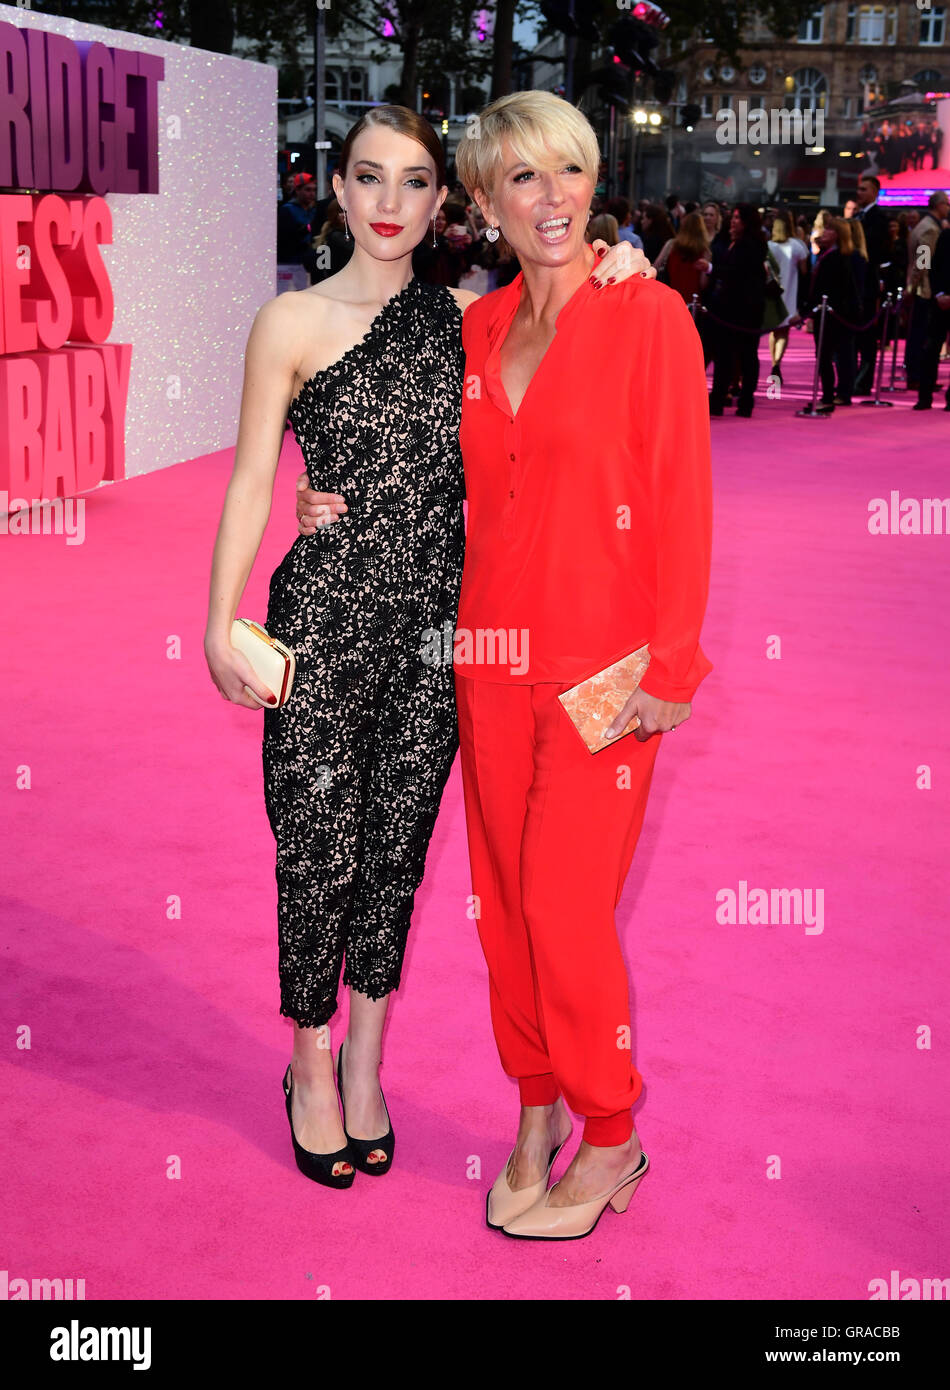 Emma Thompson and daughter Gaia Romilly Wise attending the world premiere of Bridget Jones's Baby at the Odeon cinema, Leicester Square, London. Stock Photo